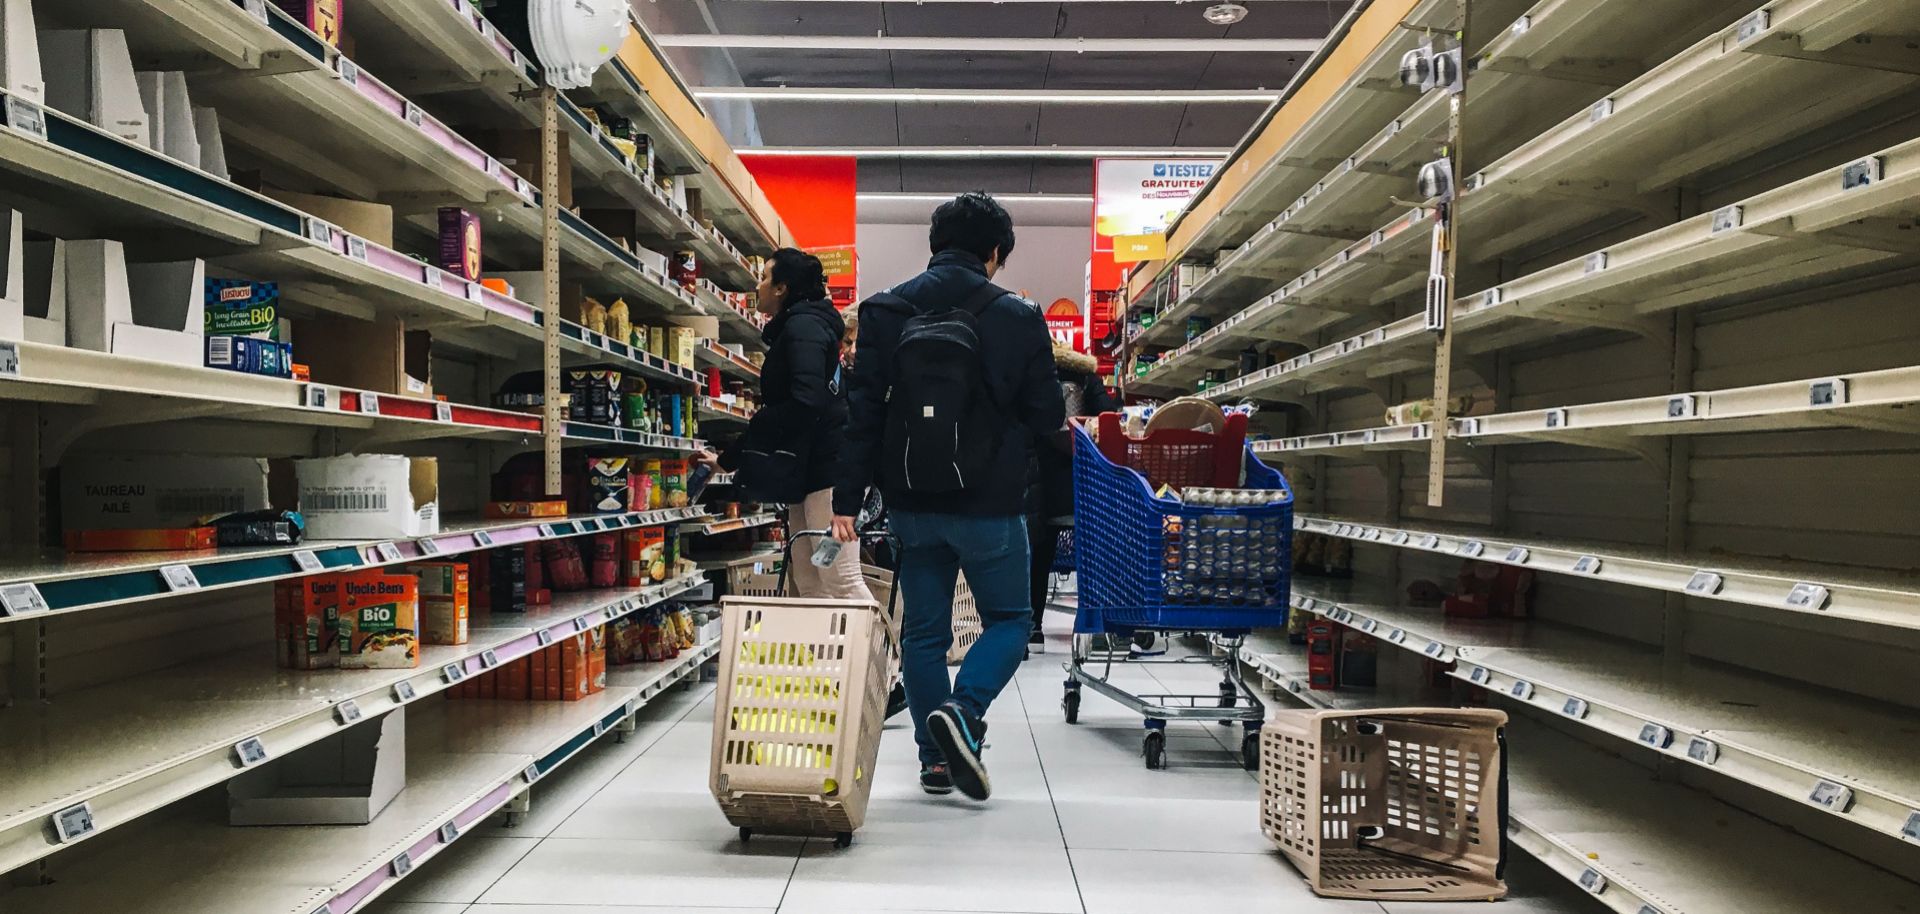 A man pulls a shopping trolley down a near-empty aisle in a supermarket in Paris, France, on March 2, 2020. Supermarket shelves in countries affected by the COVID-19 pandemic have been emptied of basic food necessities in recent weeks, such as pasta and rice. 